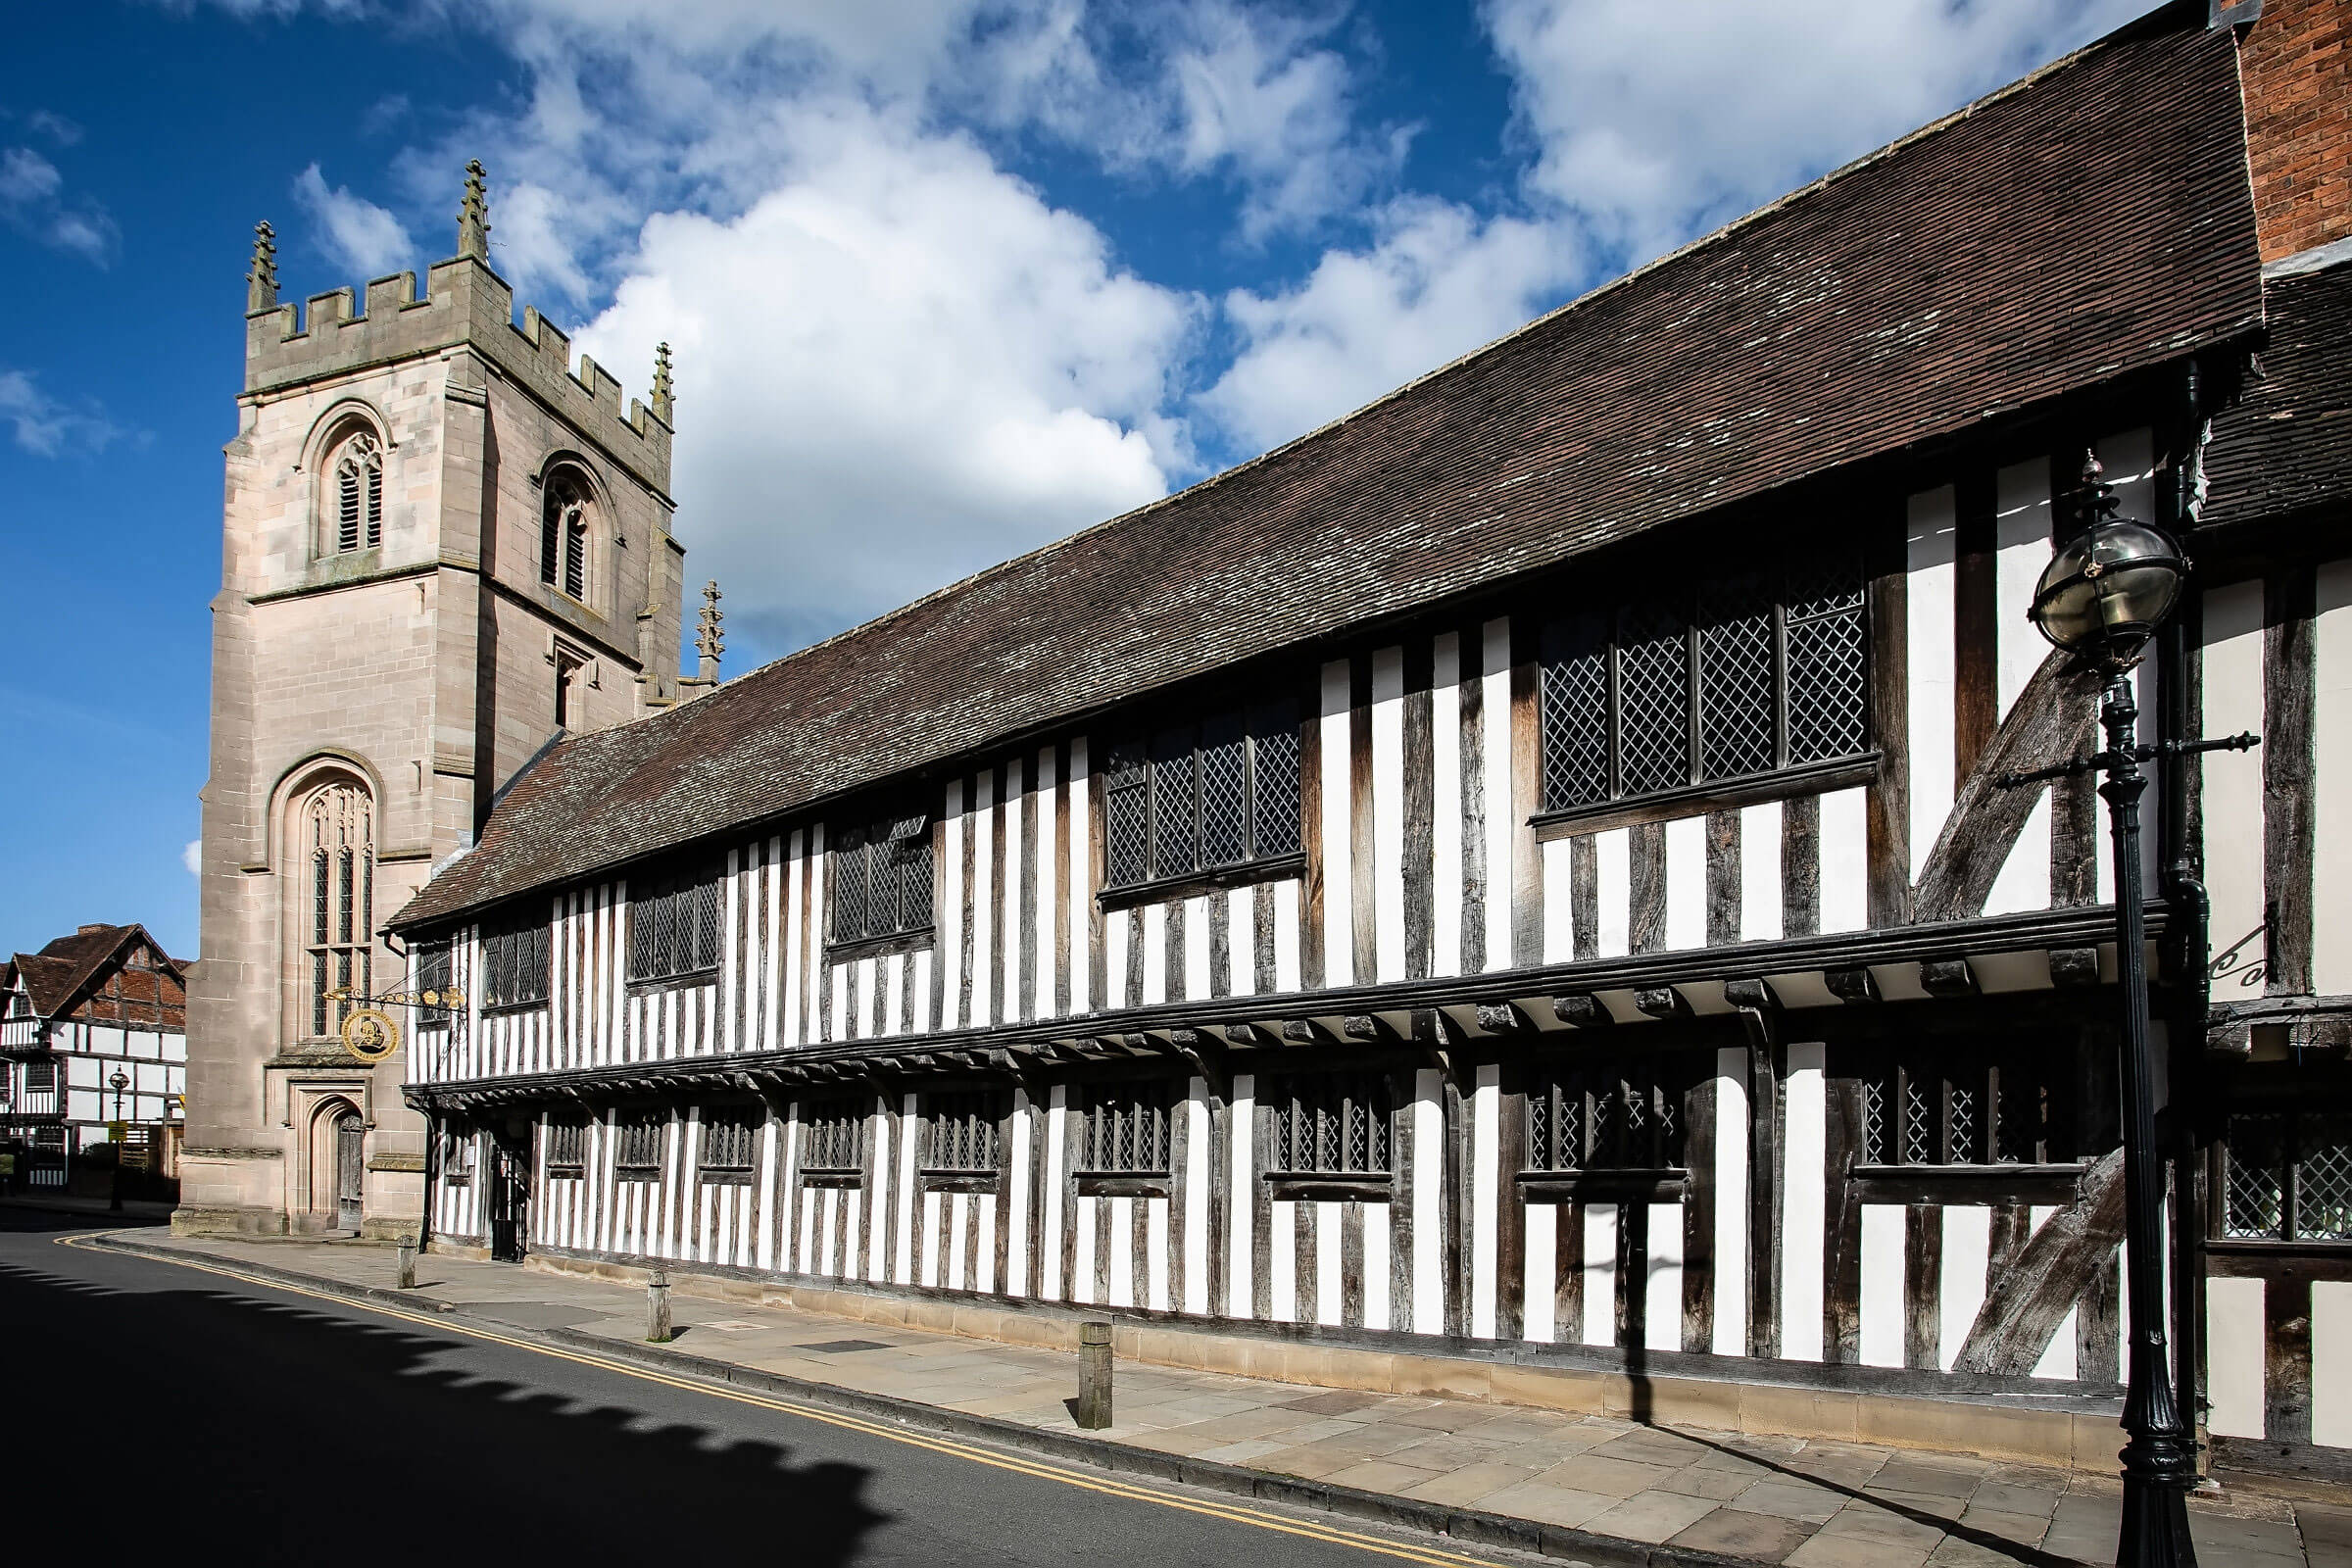 Shakespeare's Schoolroom and Guildhall